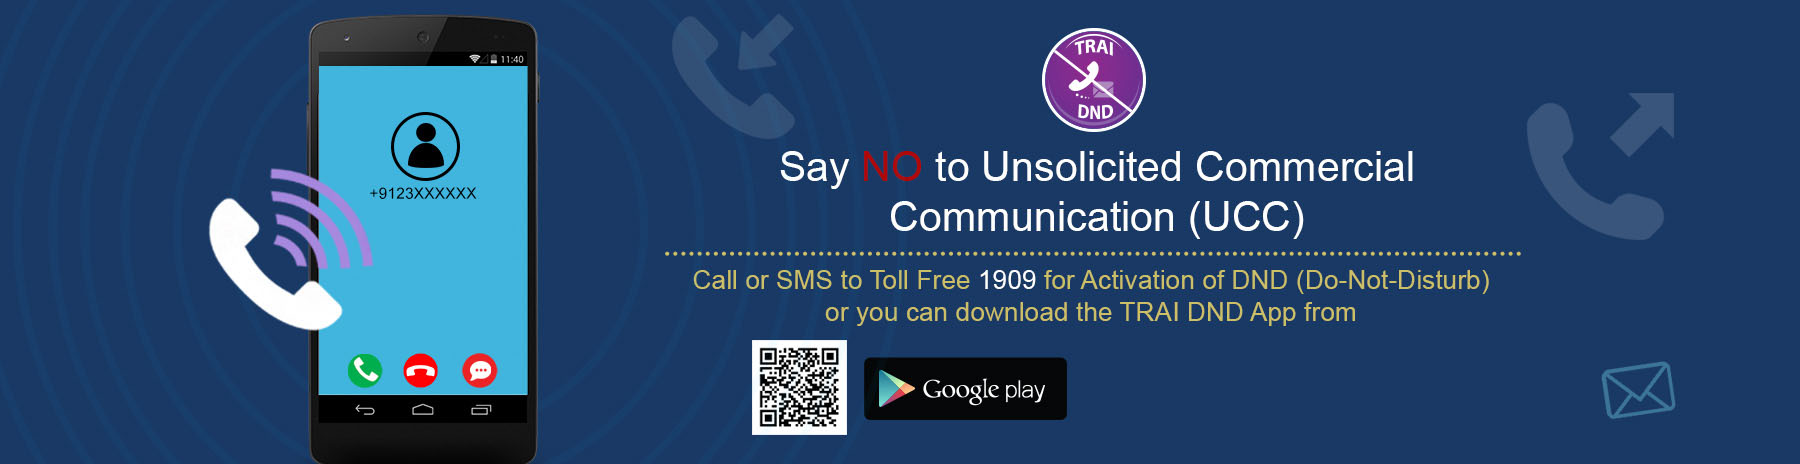 Say NO to Unsolicited Commercial Communication (UCC)